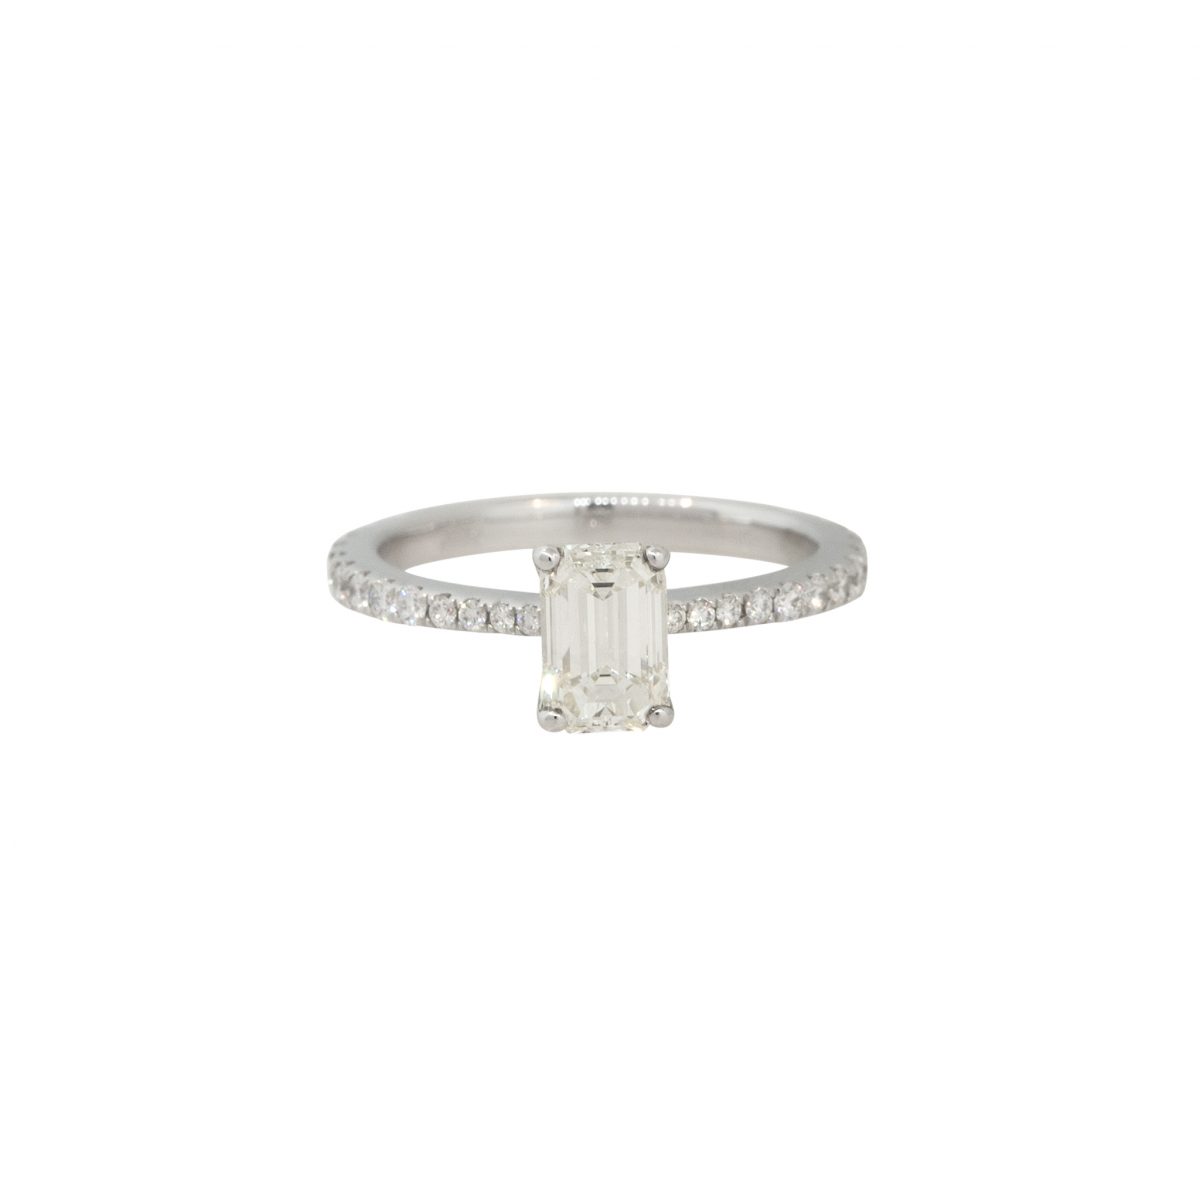 GIA Certified 18k White Gold 1.21ctw Emerald Cut Diamond Engagement Ring